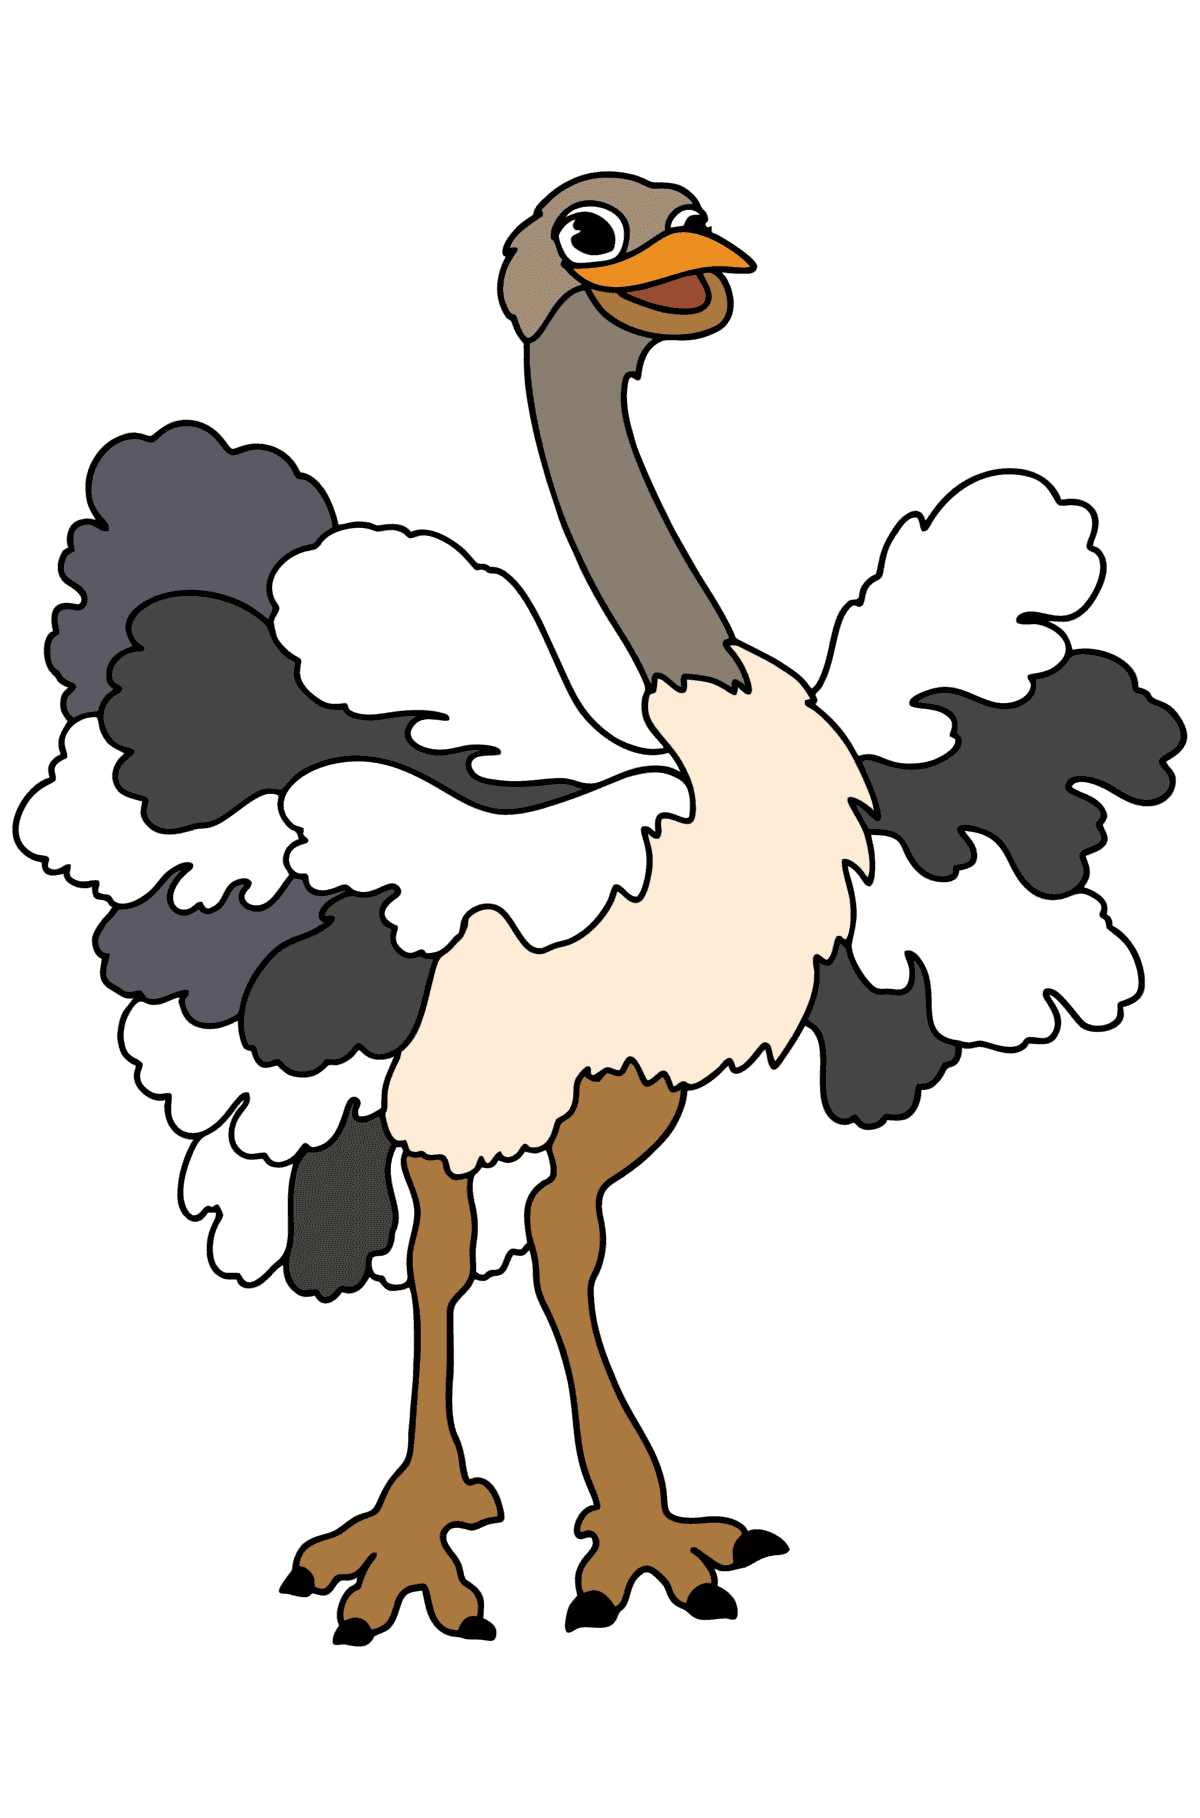 Emu сoloring page - Coloring Pages for Kids